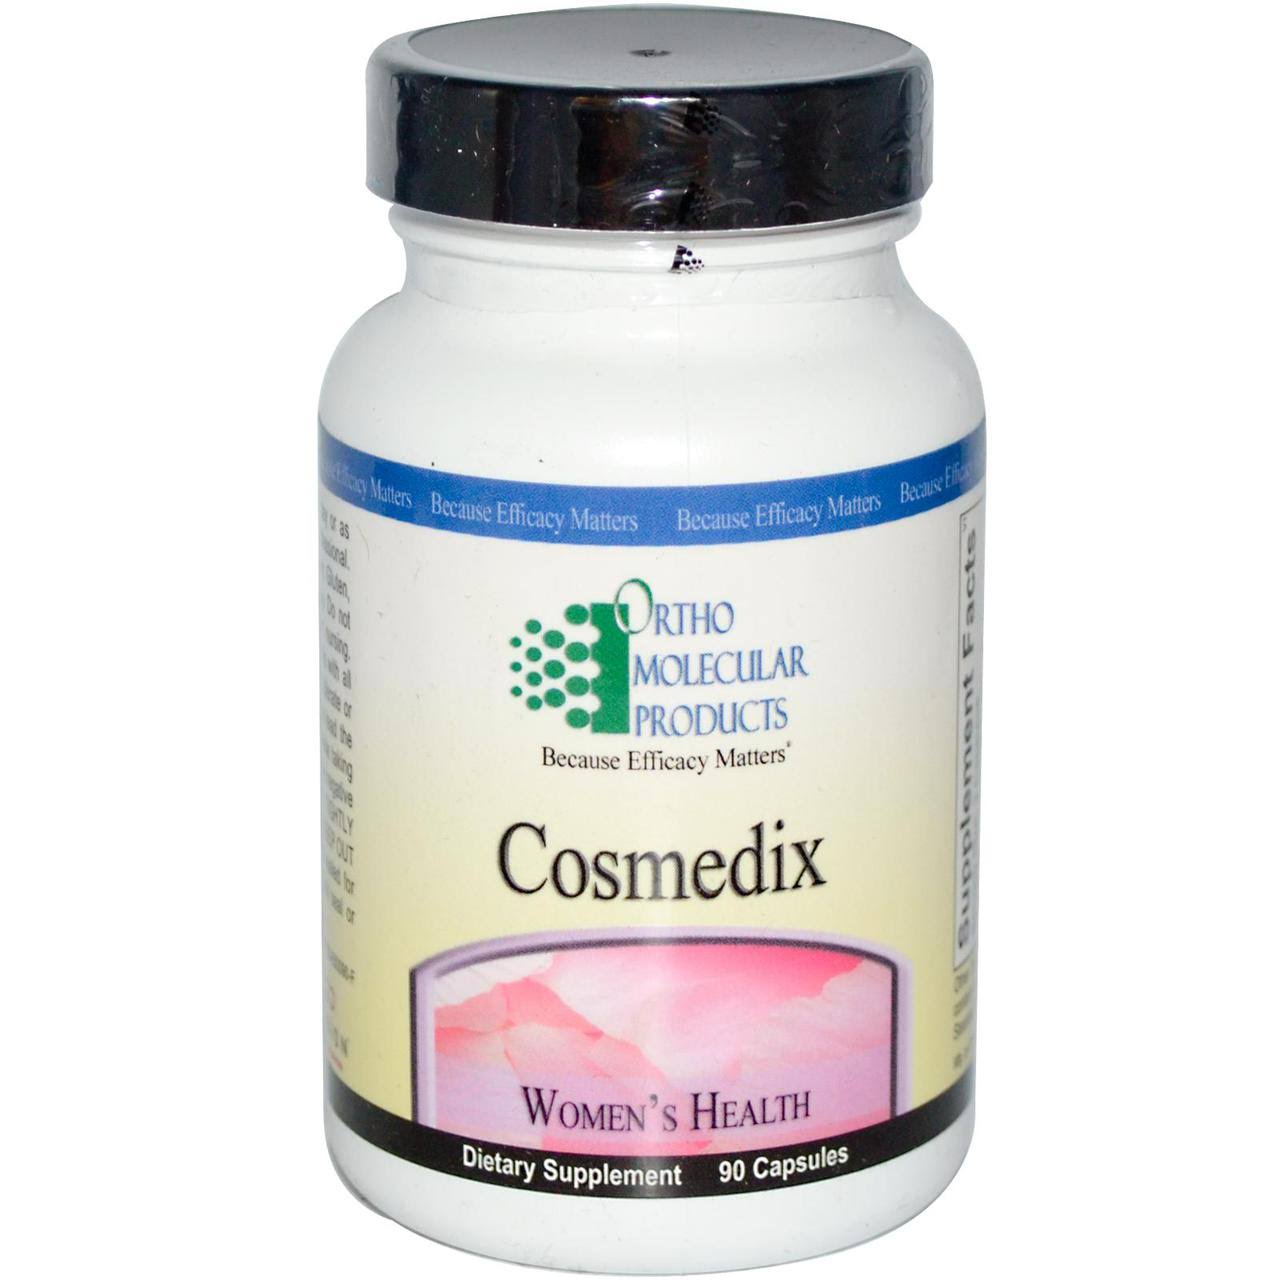 Ortho Molecular Products Cosmedix Dietary Supplement - 90ct